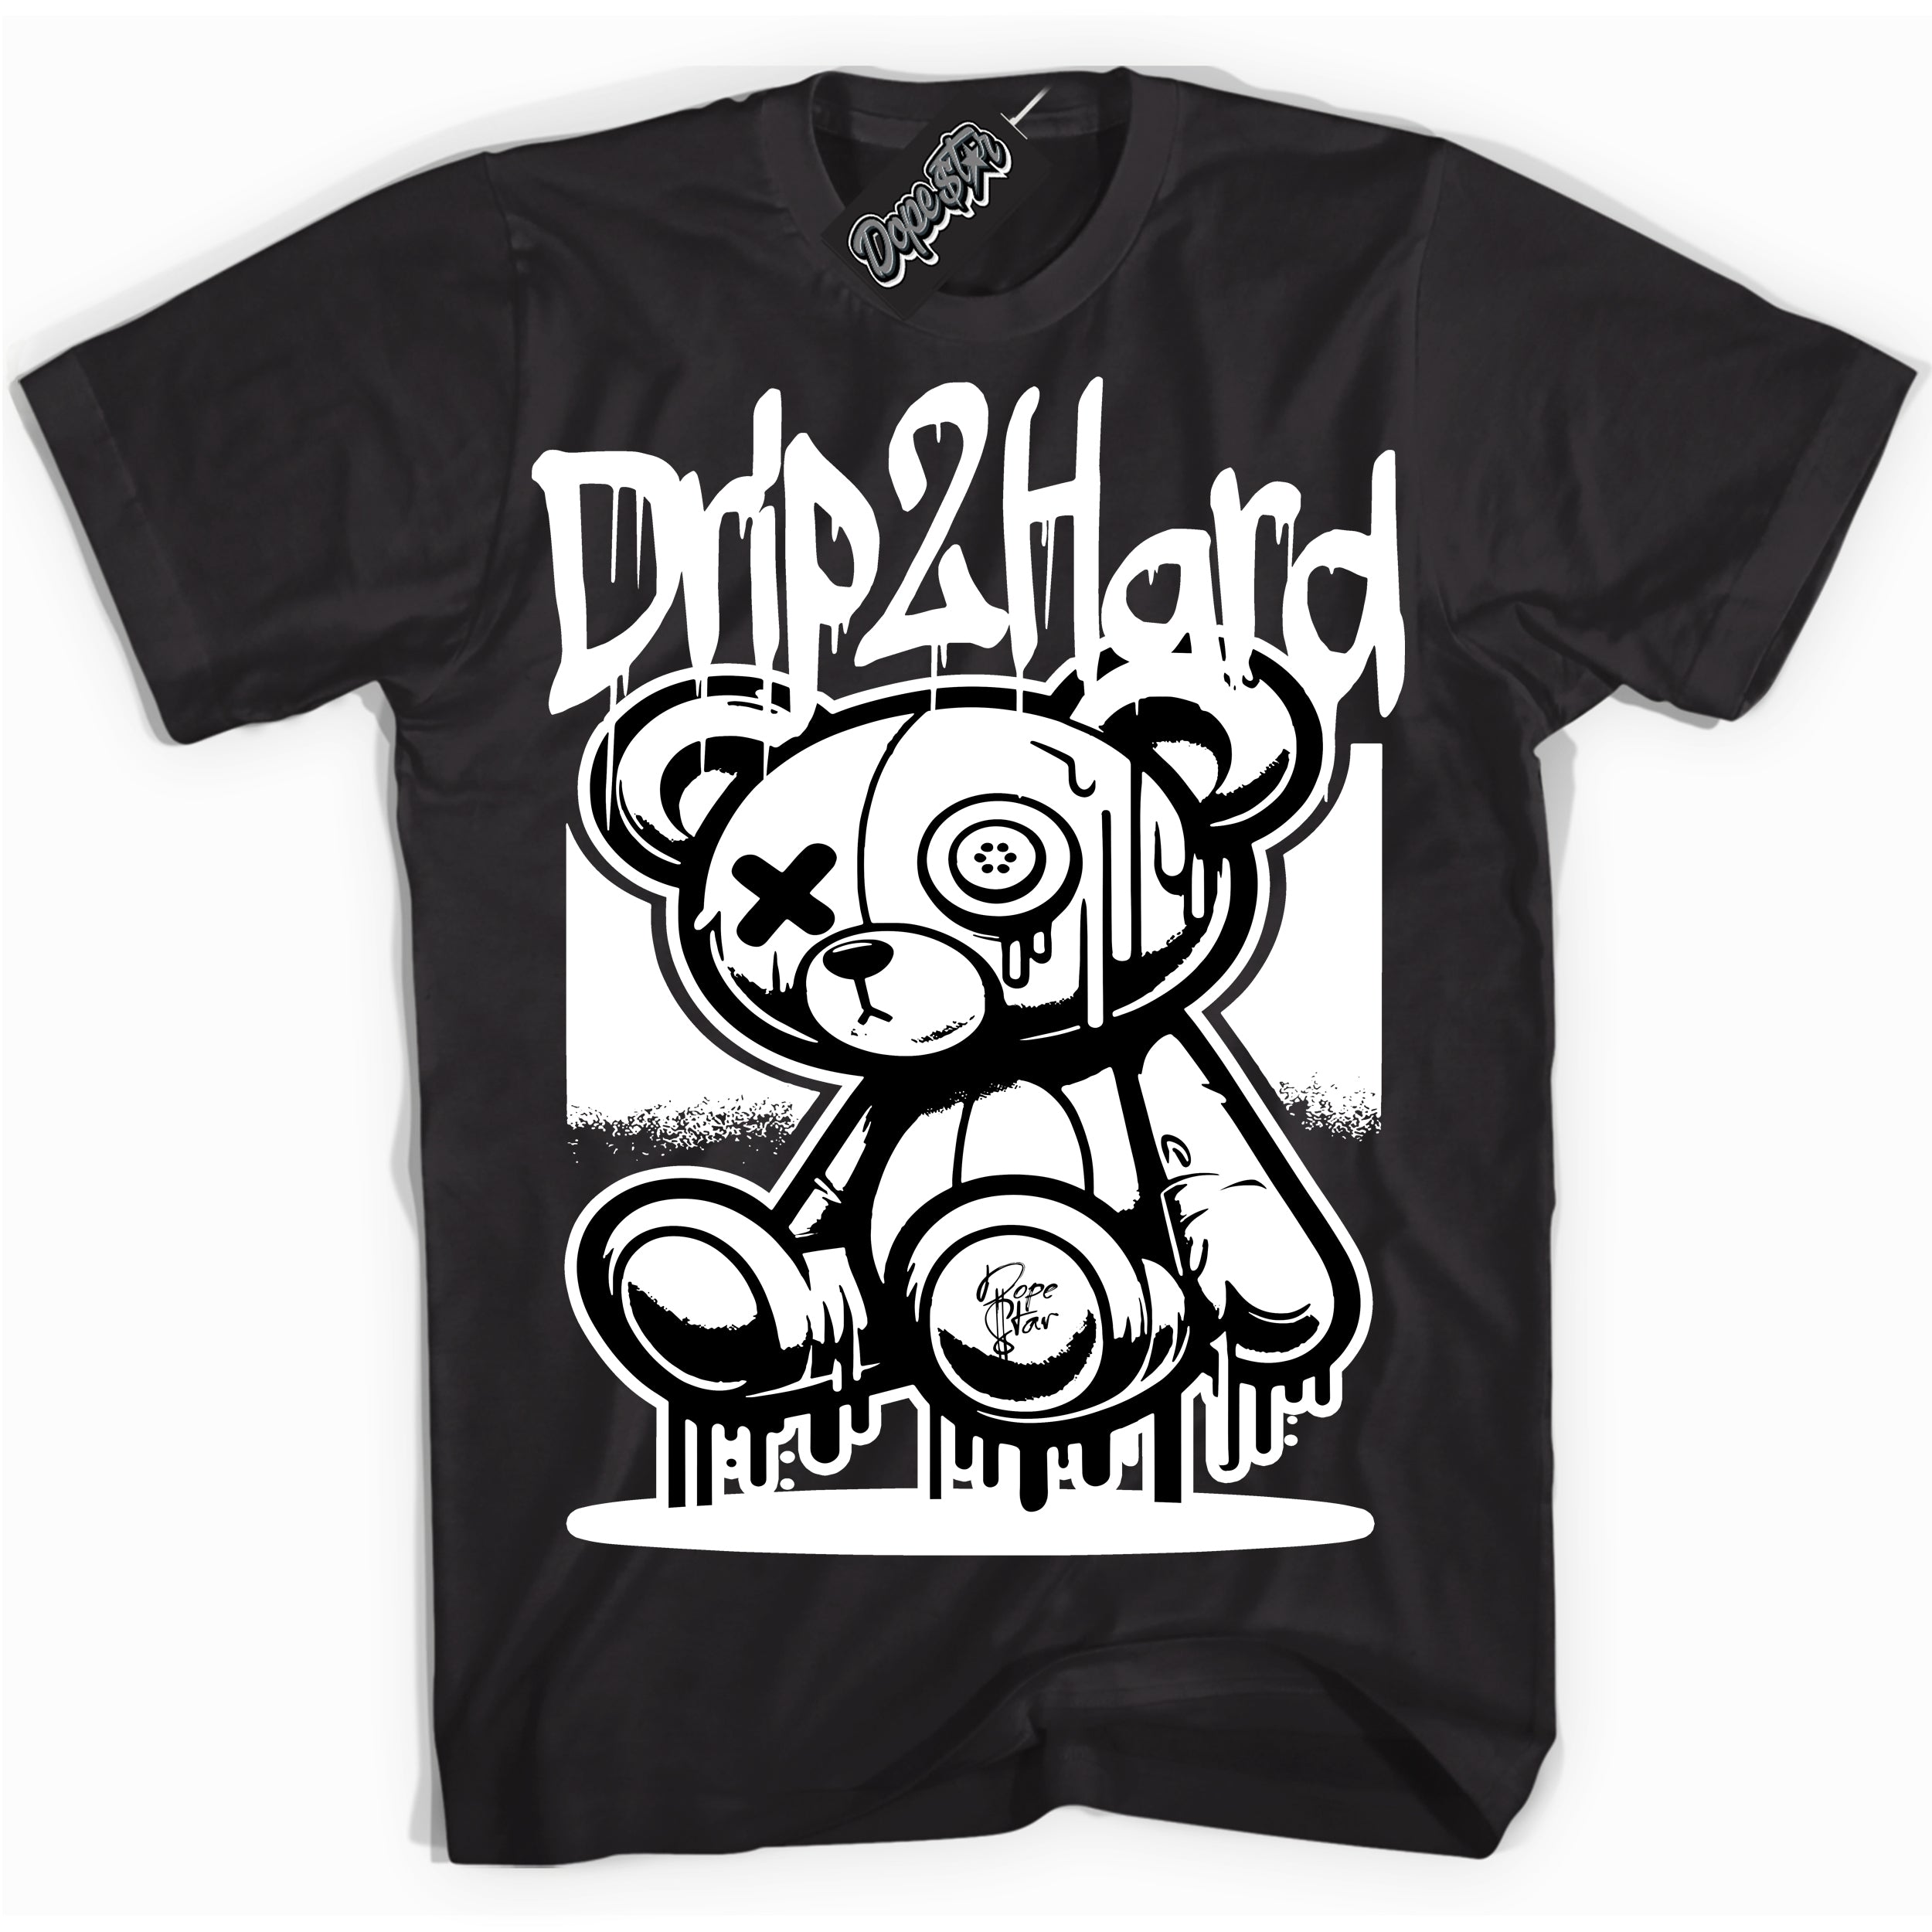 Cool Black graphic tee with “ Drip 2 Hard ” design, that perfectly matches Black Paisley